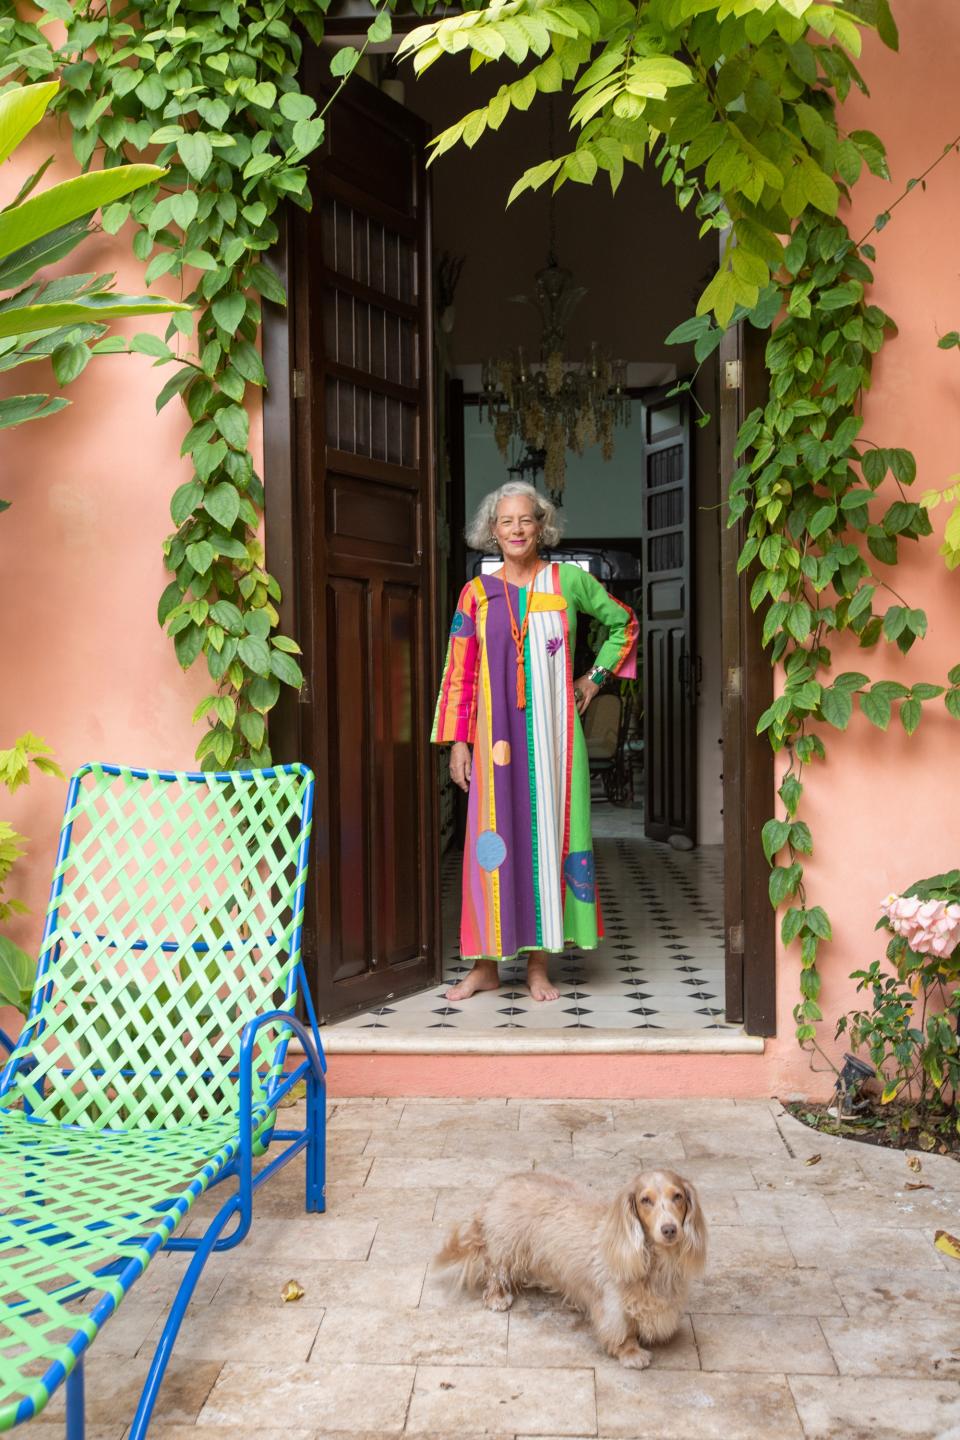 Product designer and decorator Marjorie Skouras relocated from Los Angeles to Mérida, Mexico, to restore a dilapidated 19th-century mansion in the Santiago neighborhood of the city’s Centro Histórico.